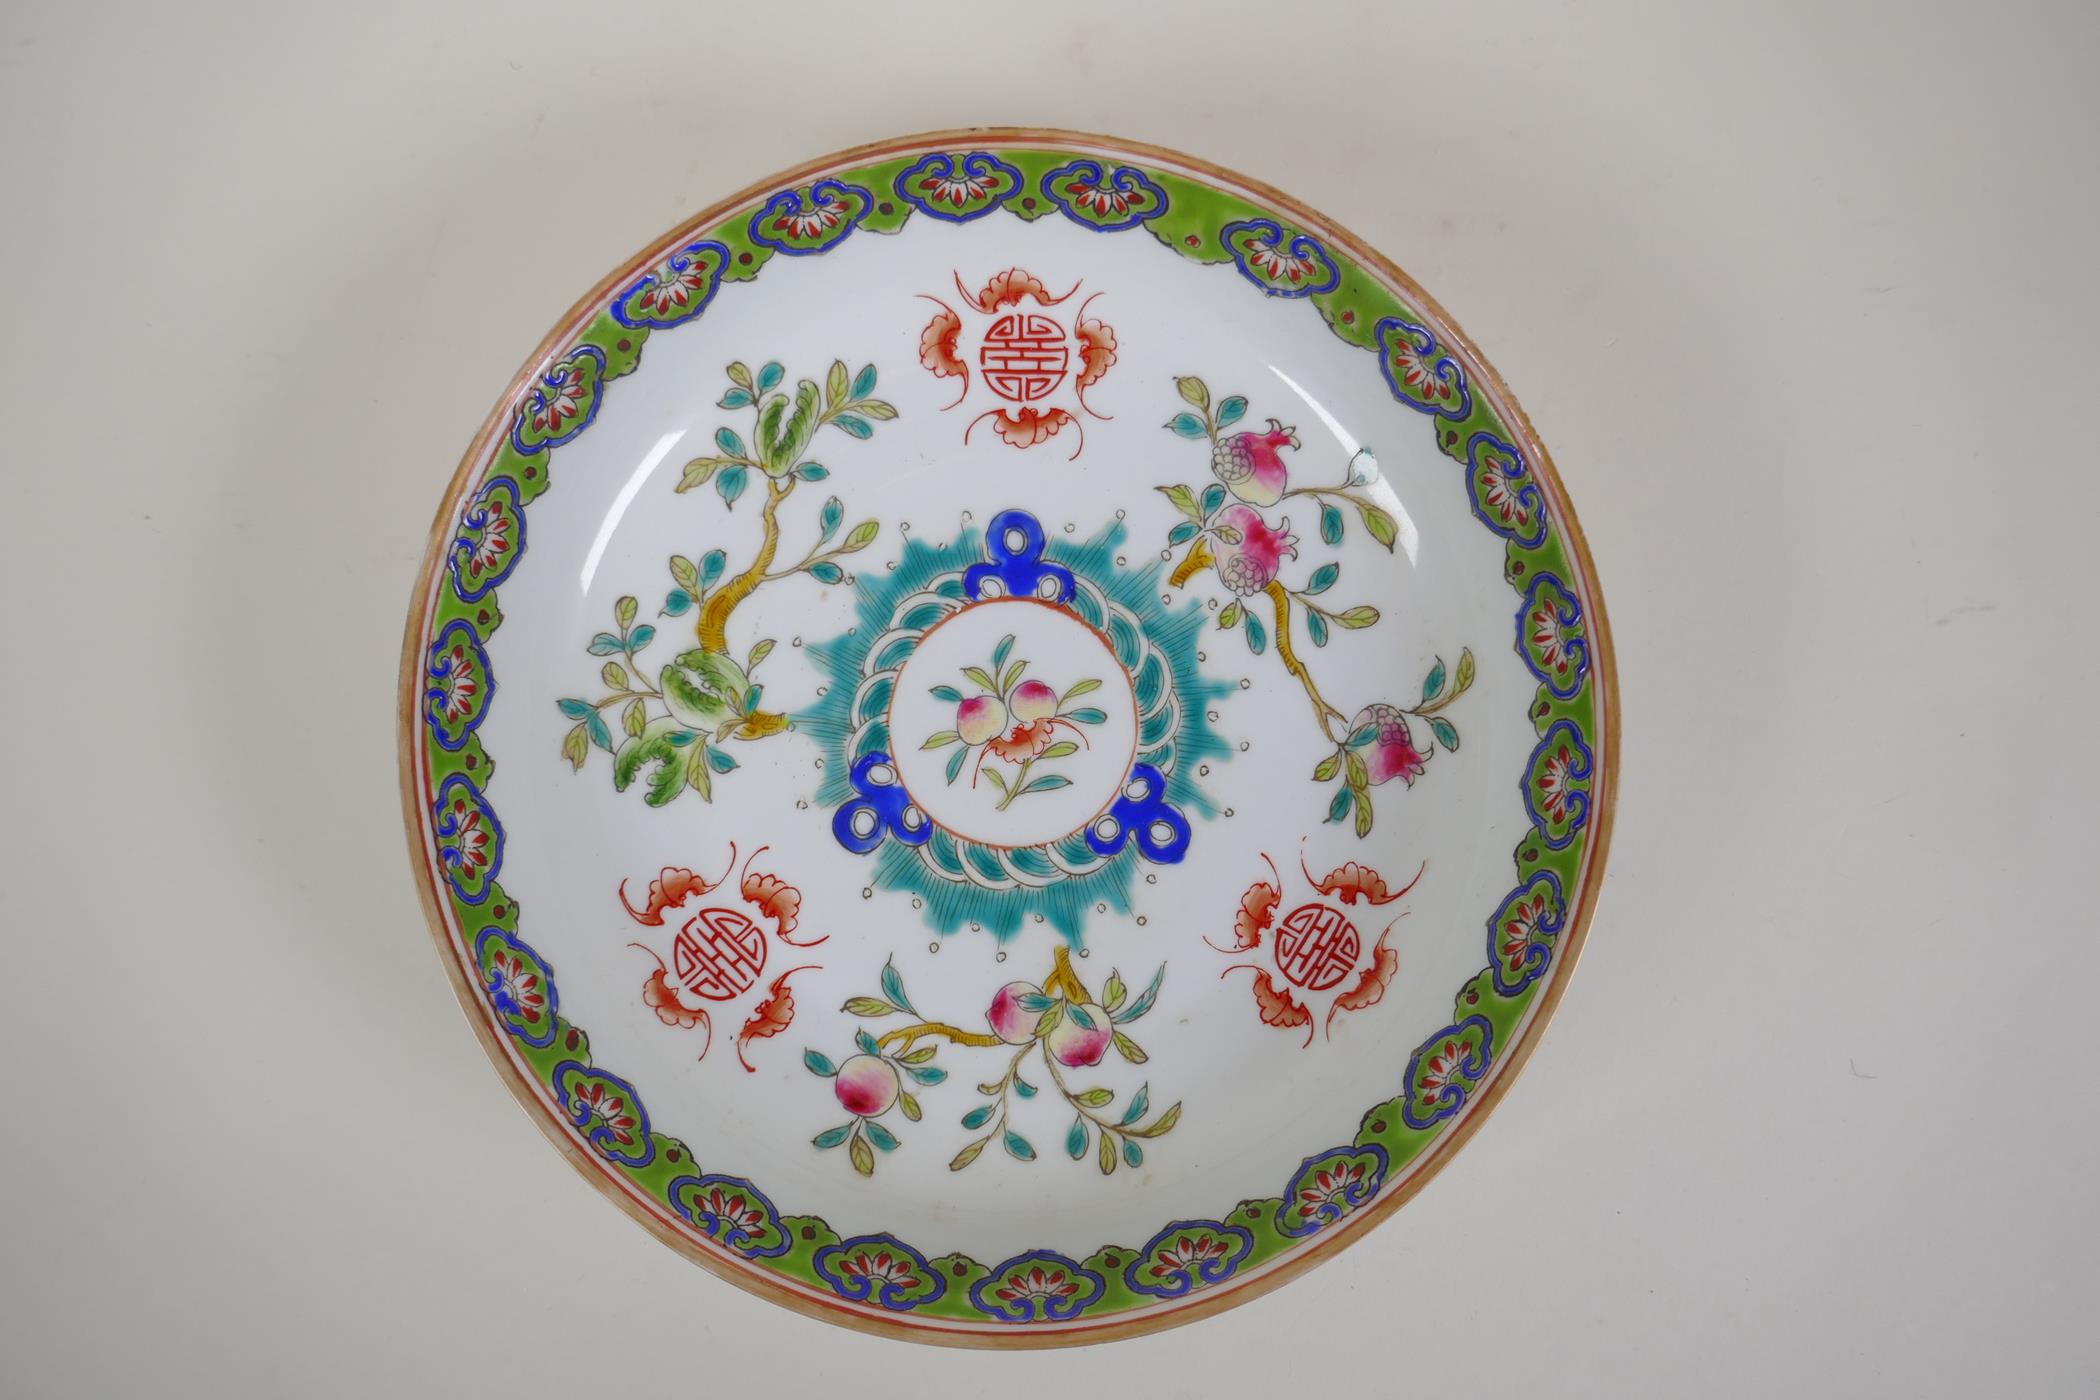 A C19th/C20th polychrome porcelain dish with enamelled decoration of fruits, bats and auspicious